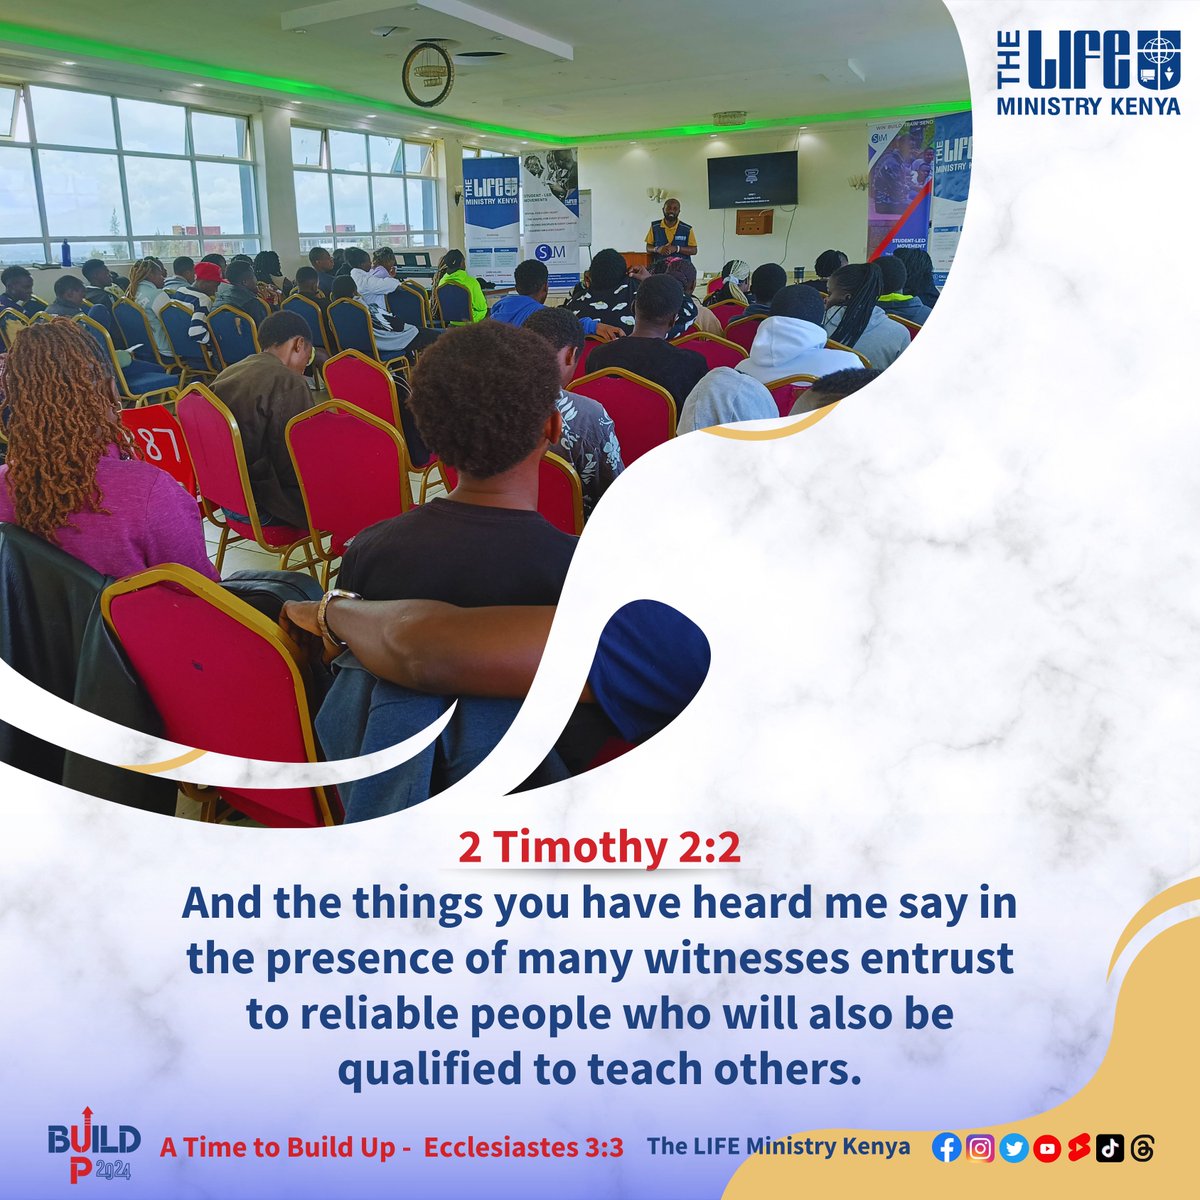 2 Timothy 2:2 And the things you have heard me say in the presence of many witnesses entrust to reliable people who will also be qualified to teach others.
#thelifeminisrtykenya
#journeytogetherbeyond50years
#StudentLedMovement
#buildup
#fireseeds
#campinglife
#april